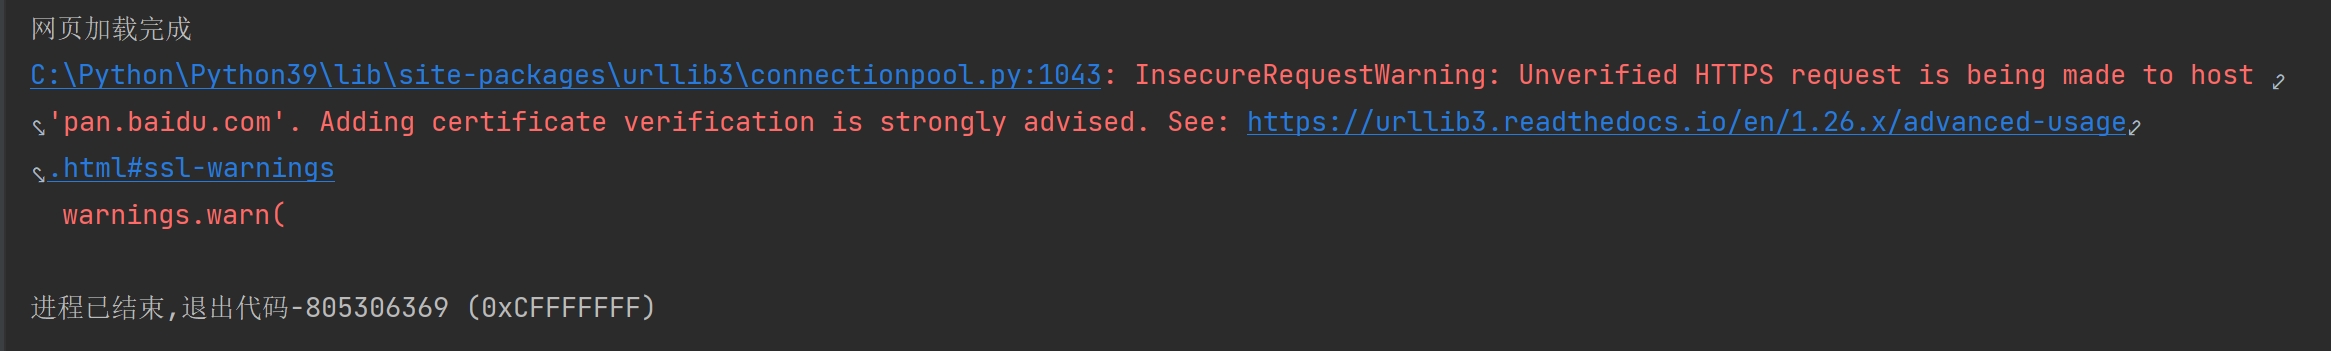 Python requests 异常InsecureRequestWarning: Unverified HTTPS request is being made to host ‘***domain’. Adding certificate verification is strongly advised. See…解决